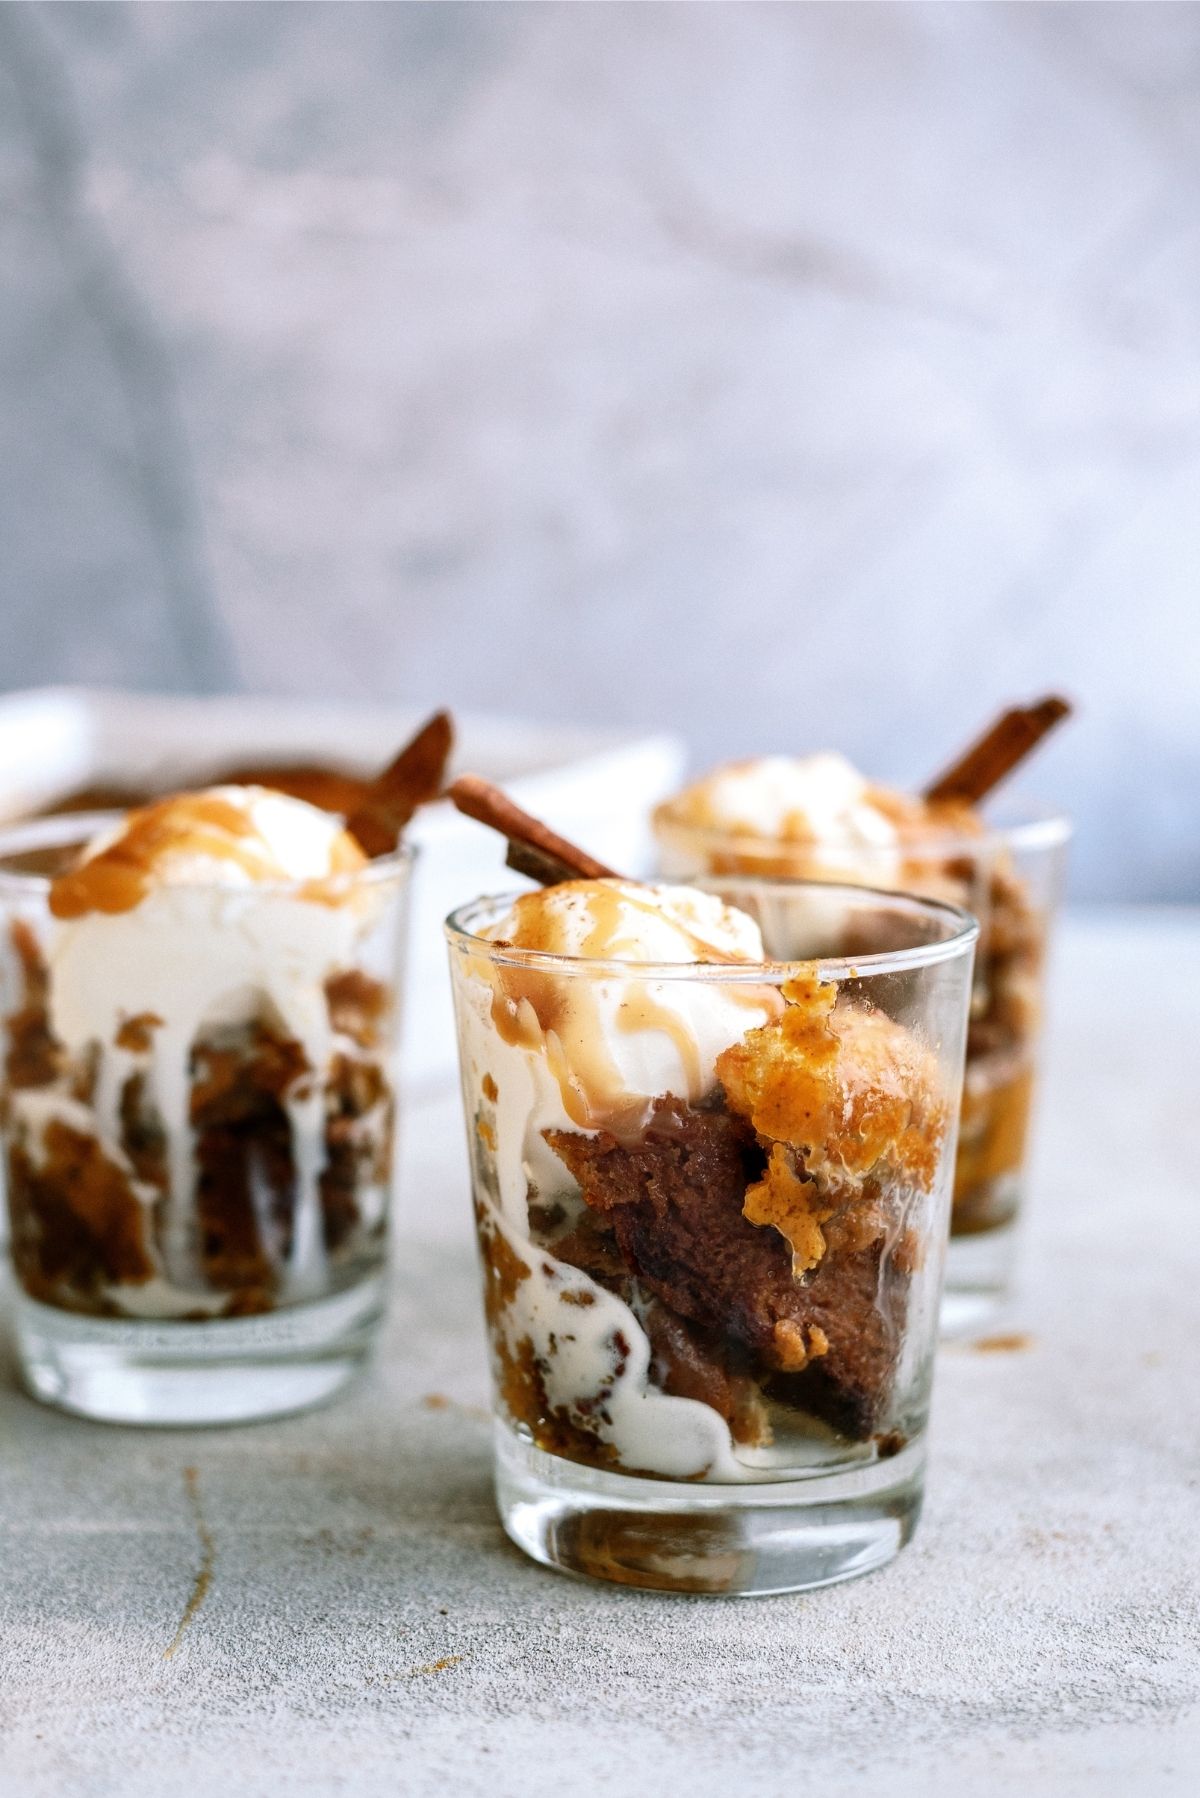 Pumpkin Pecan Cobbler in individual cups with ice cream and caramel sauce